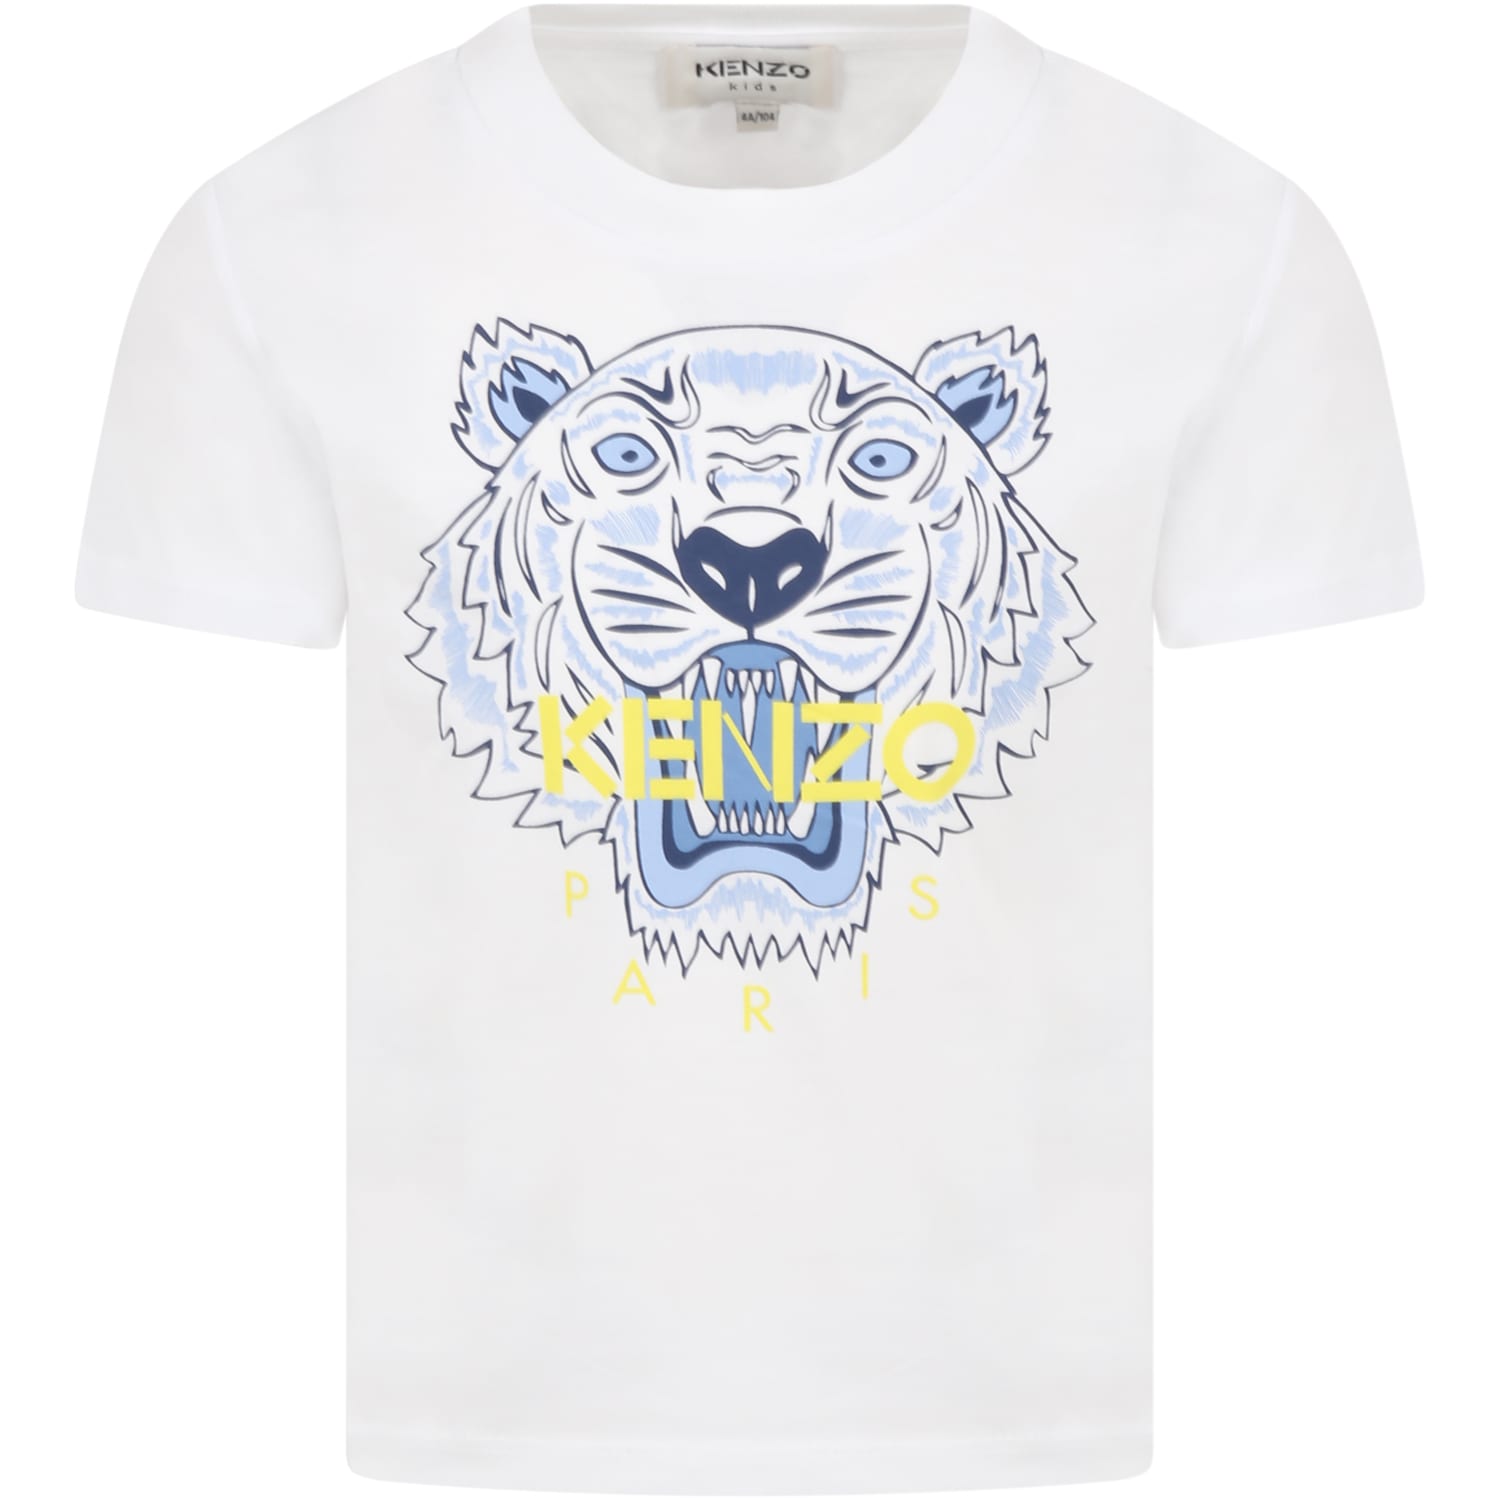 KENZO WHITE T-SHIRT FOR BOY WITH TIGER